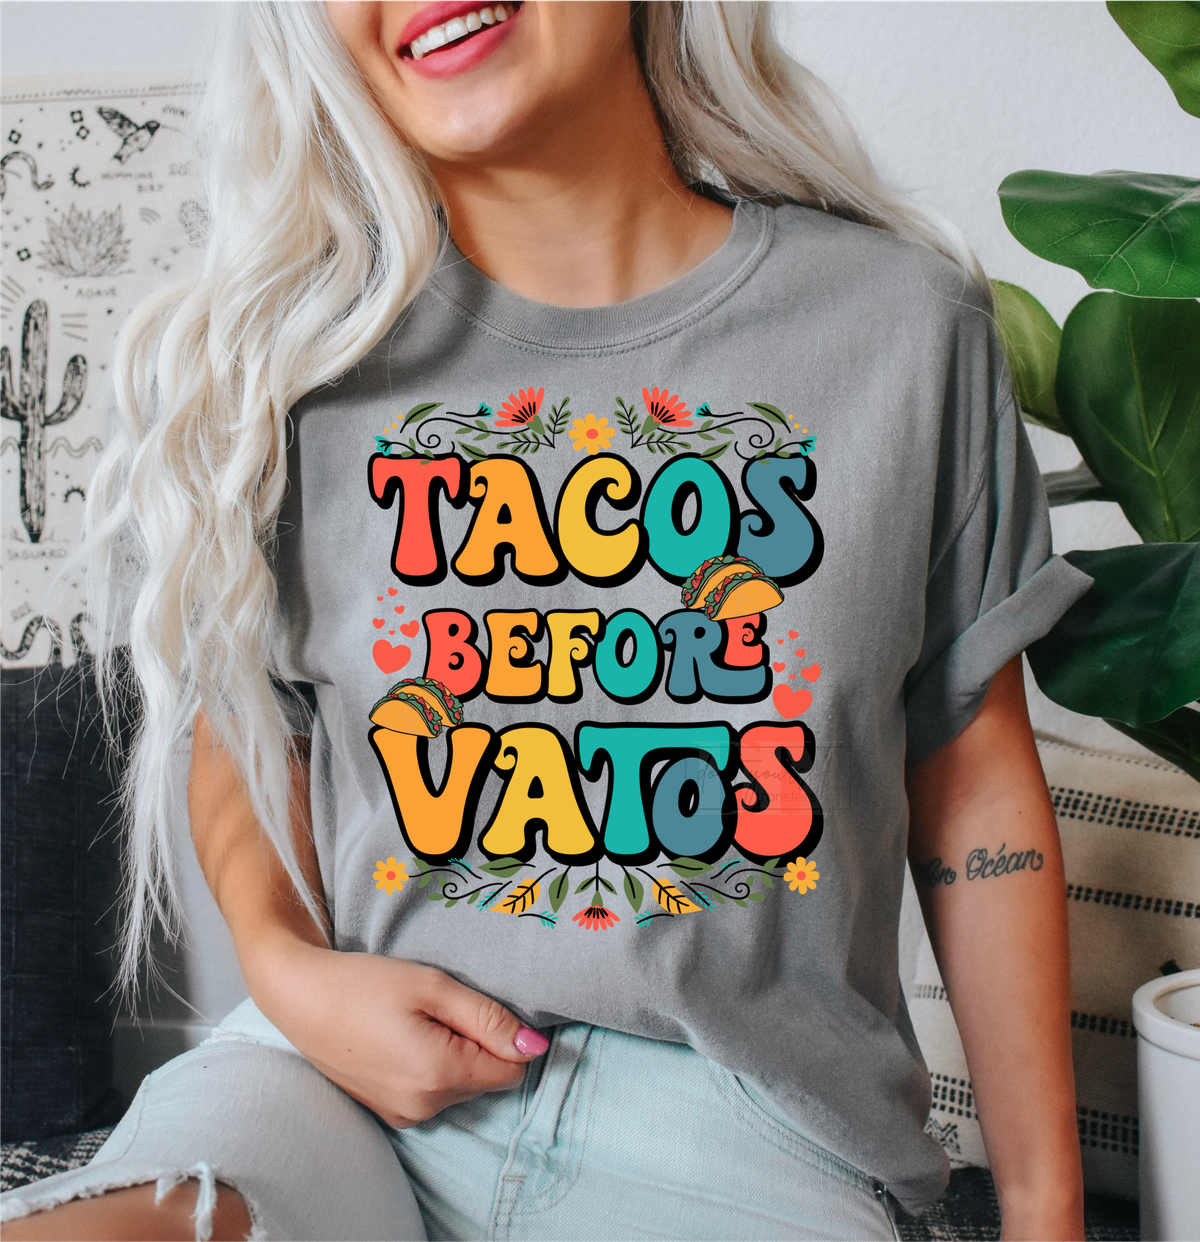 Tacos before Vatos  size ADULT  DTF TRANSFERPRINT TO ORDER